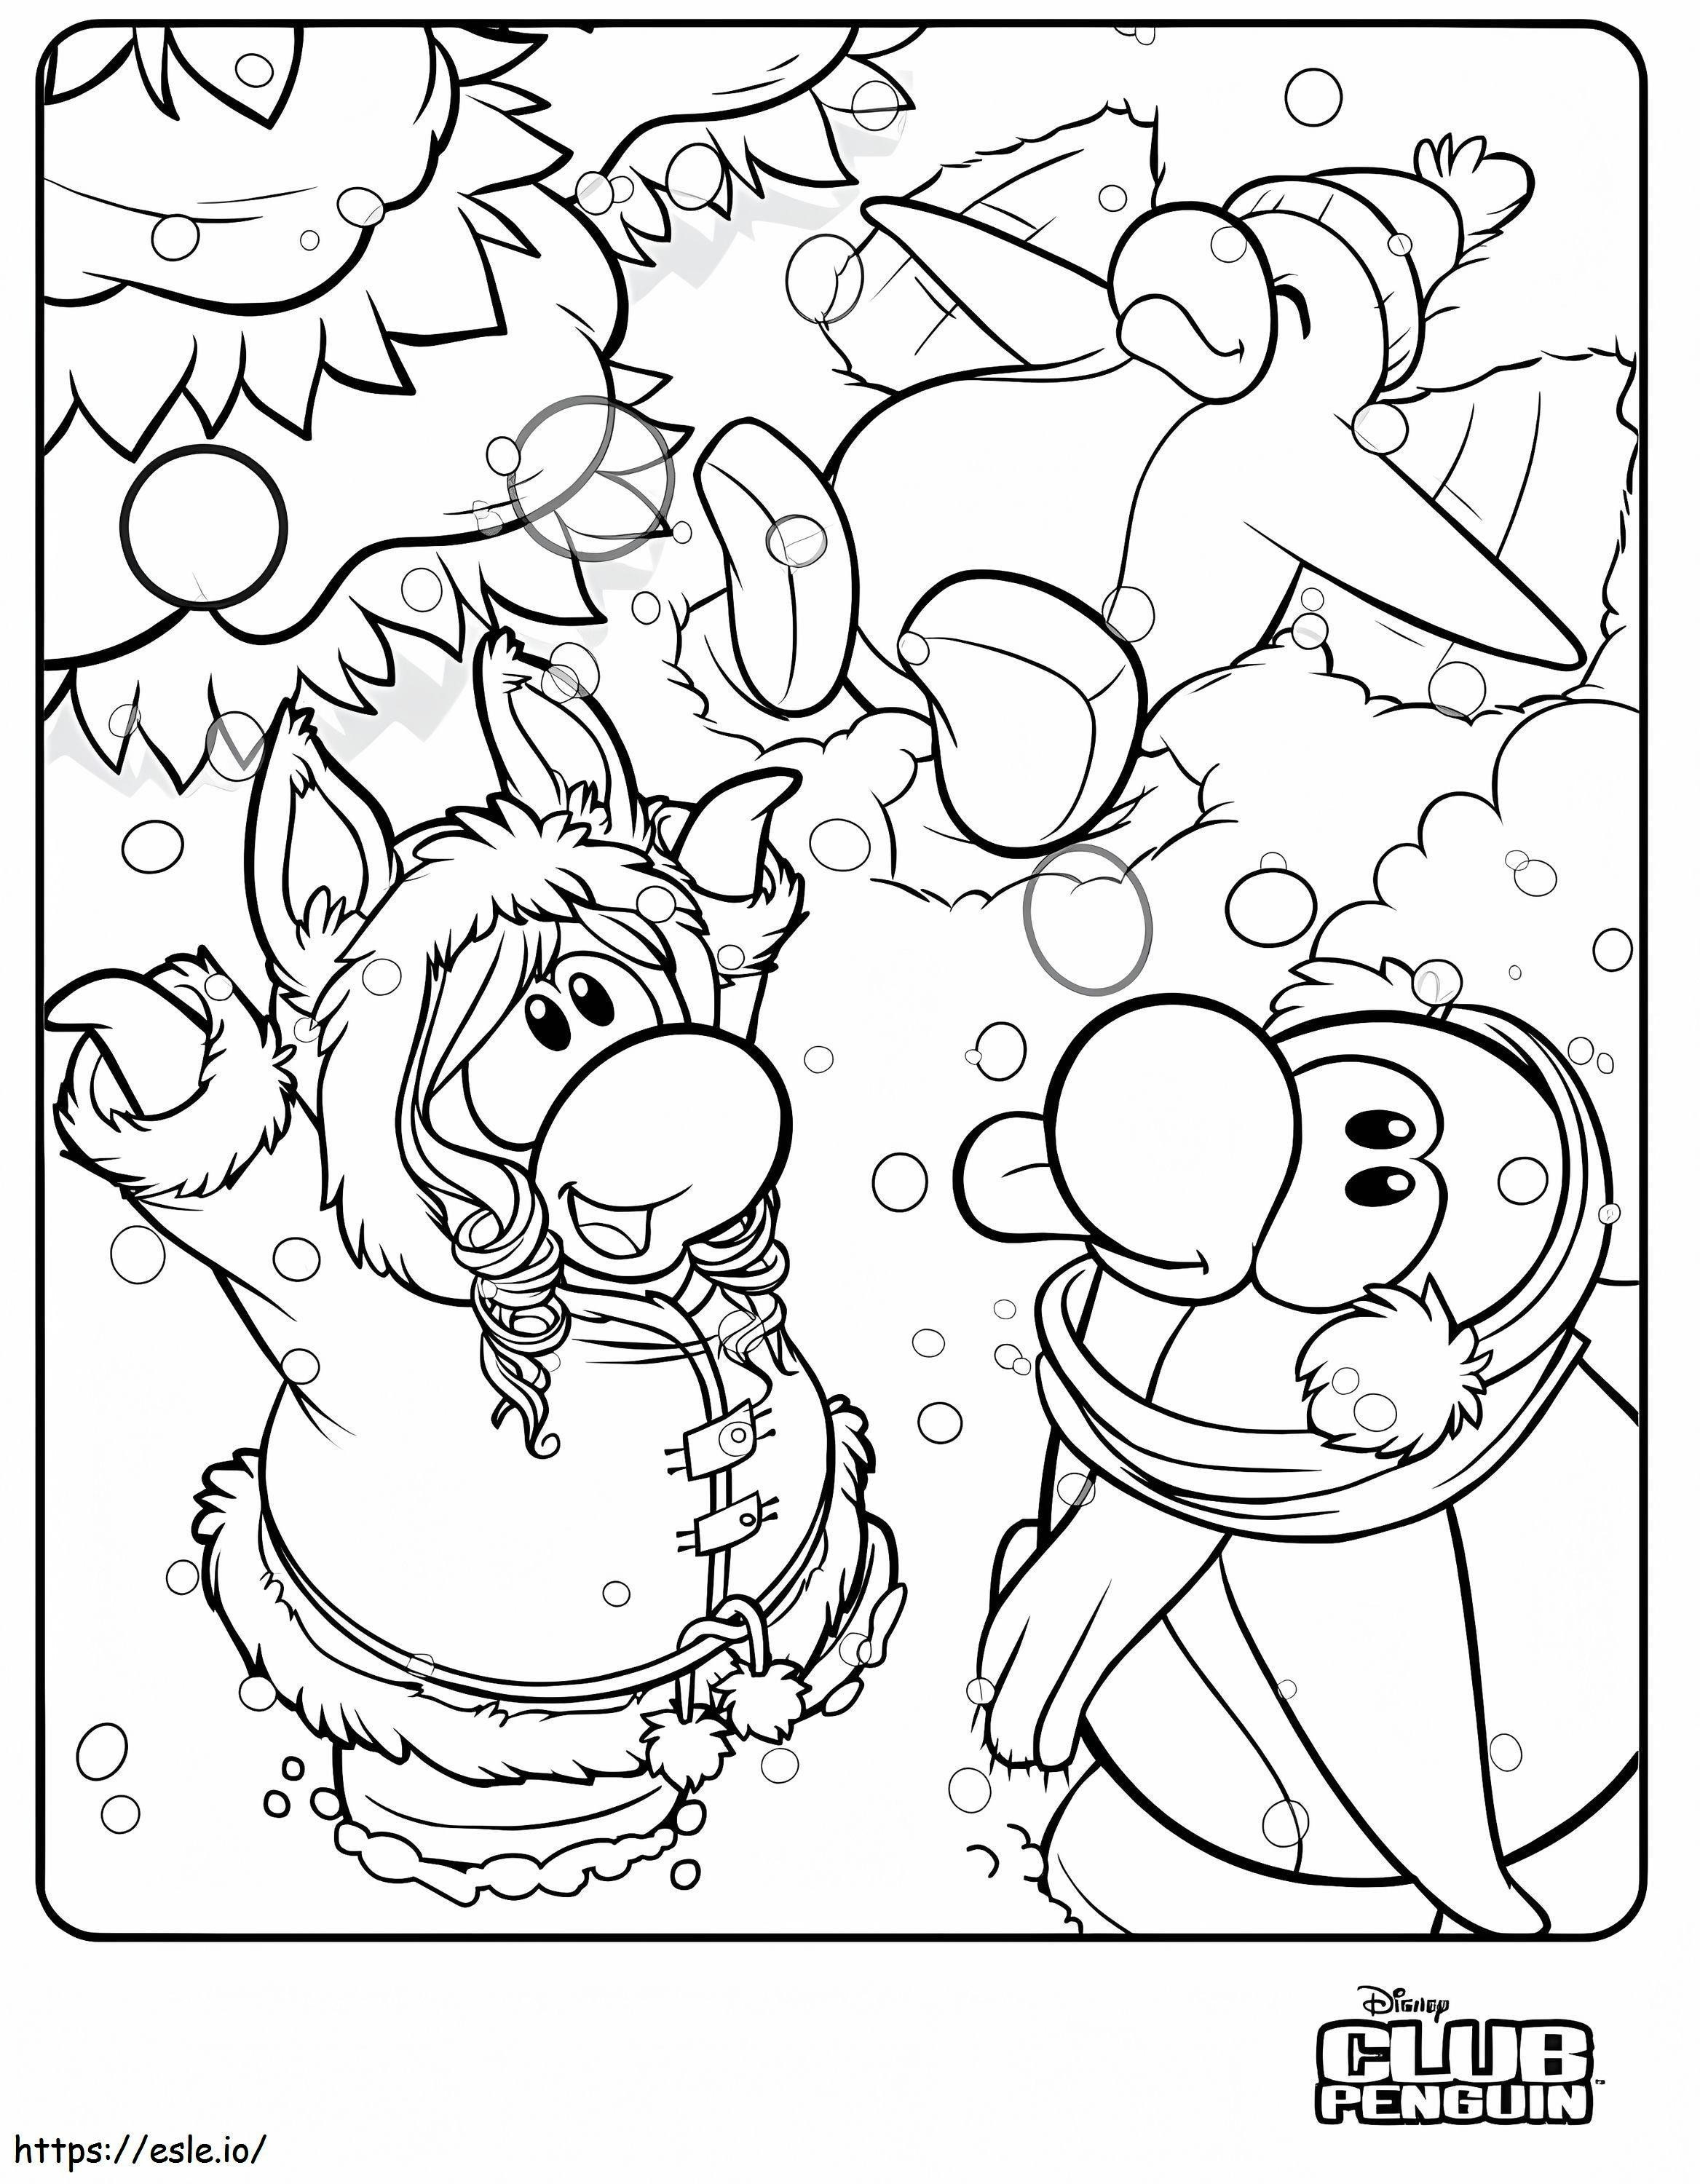 Club Penguin Christmas coloring page